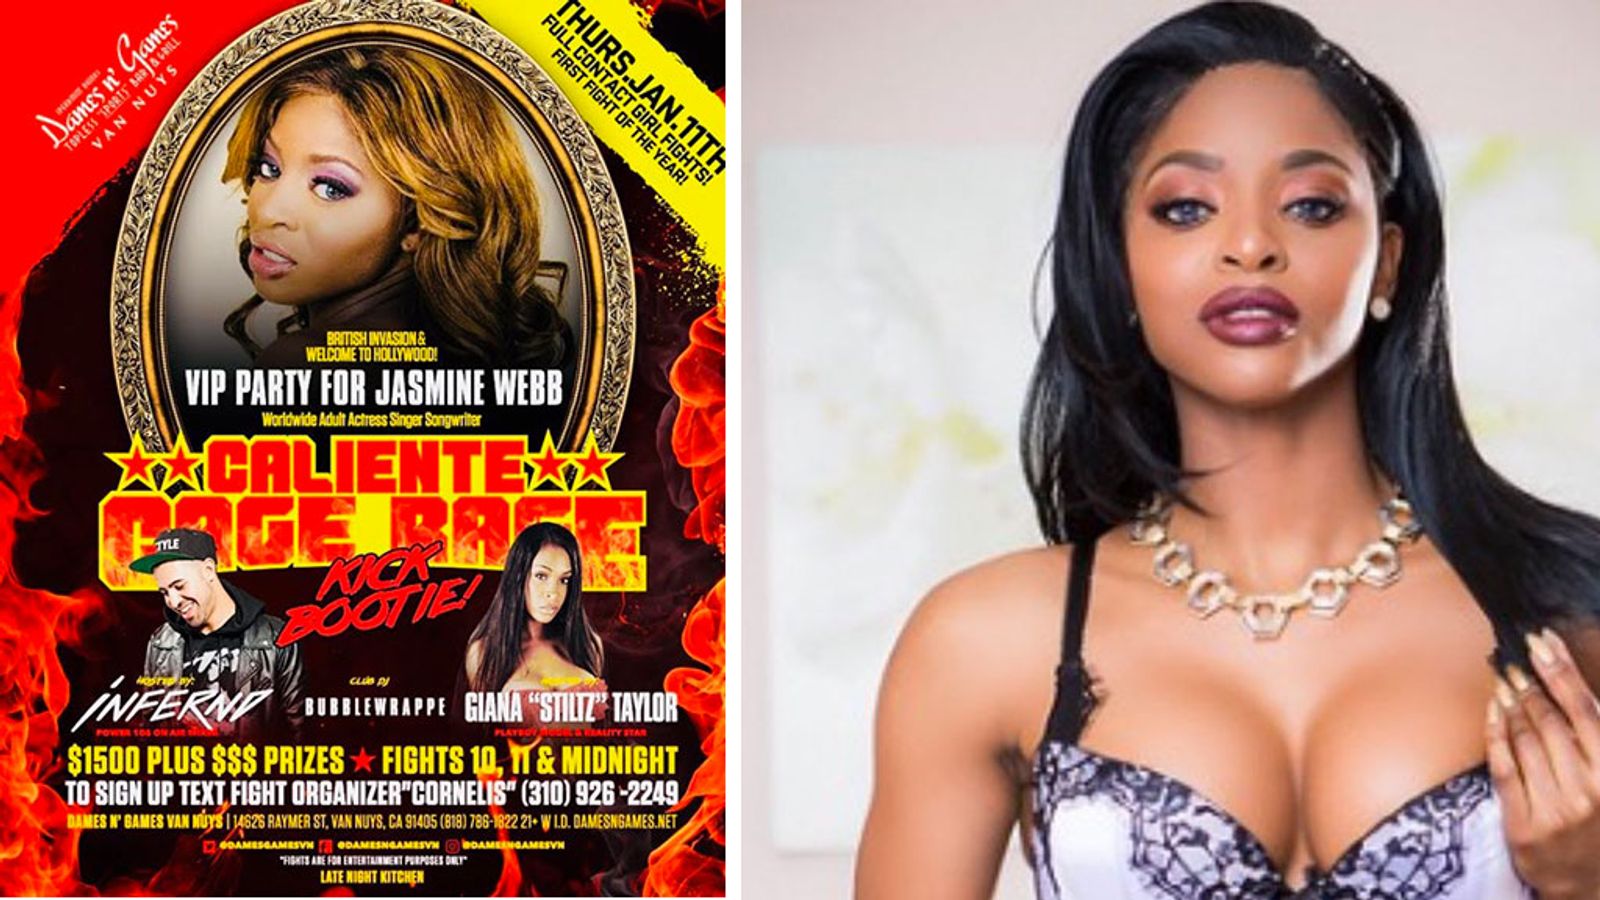 Jasmine Webb To Party At Dames n' Games On Saturday, January 11